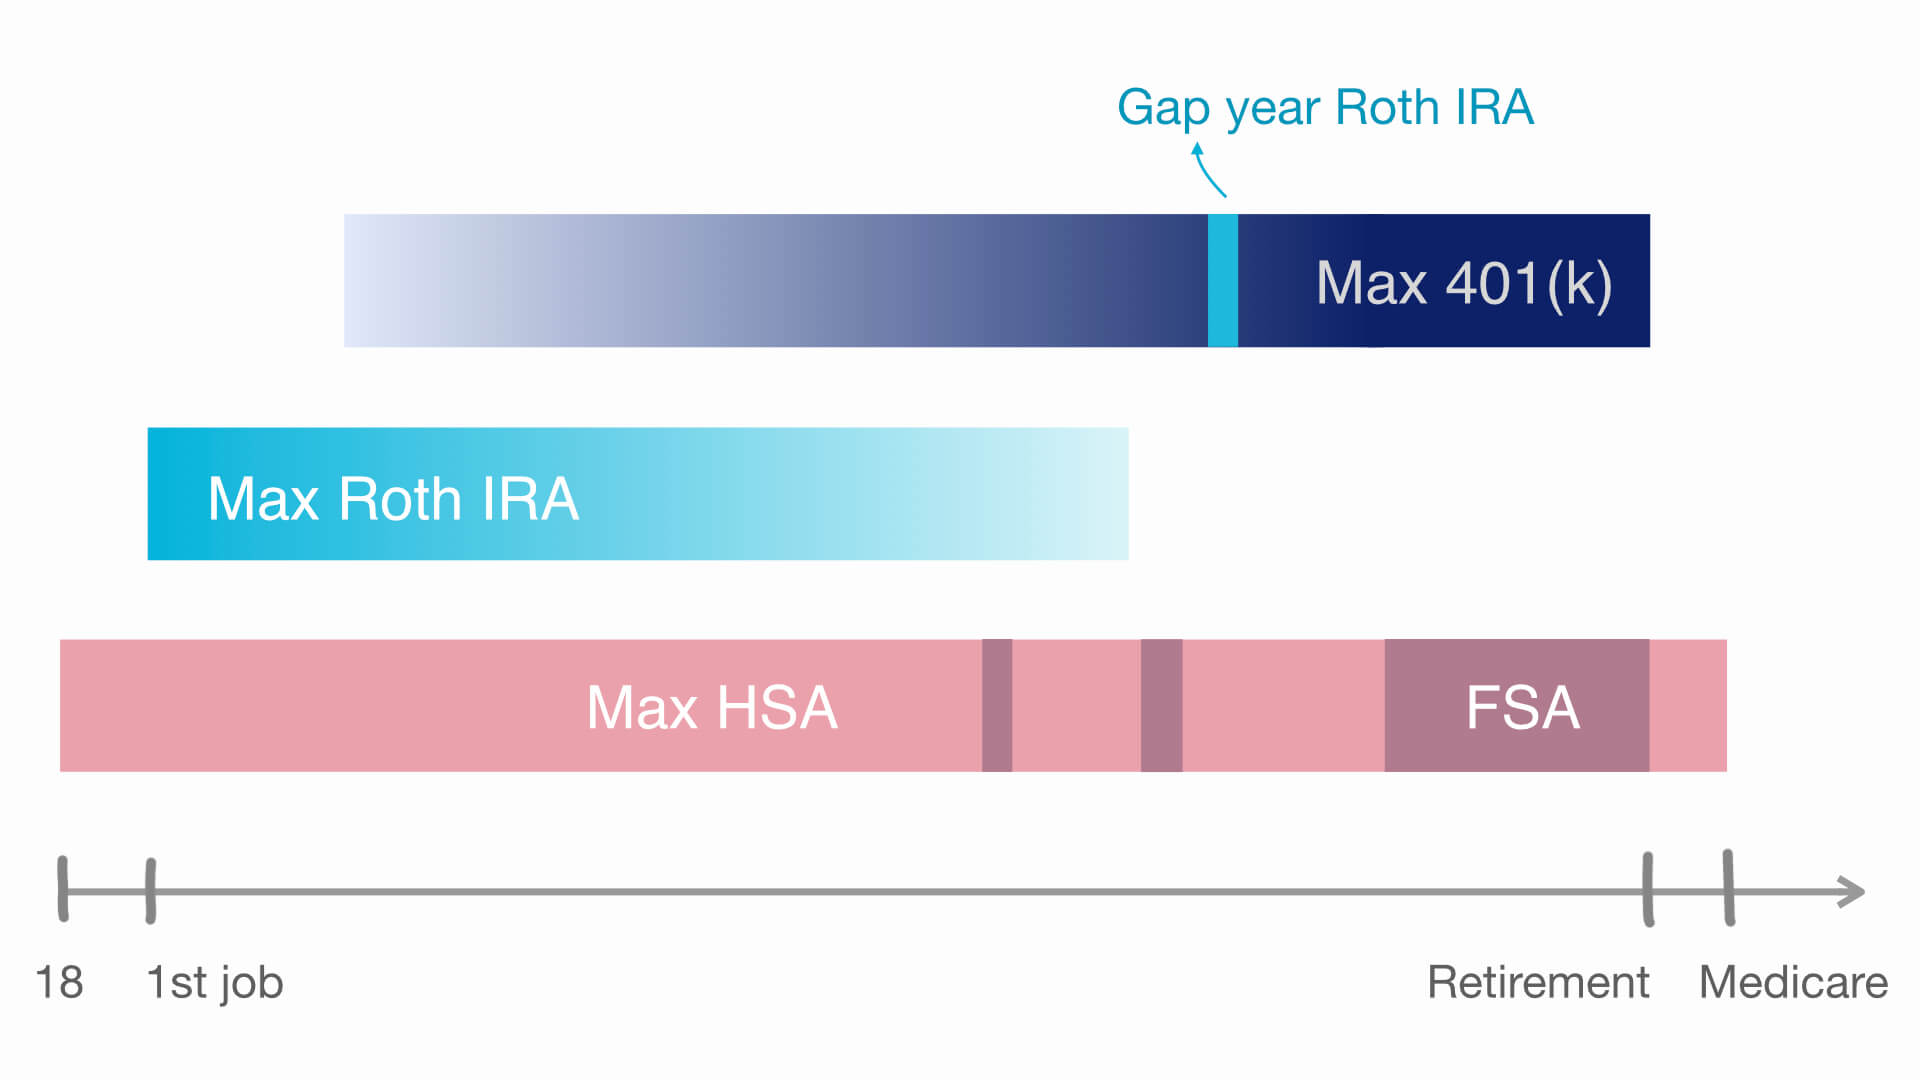 Illustration of when to max out HSA, IRS and 401(k) and use FSA from 18 years old to post retirement